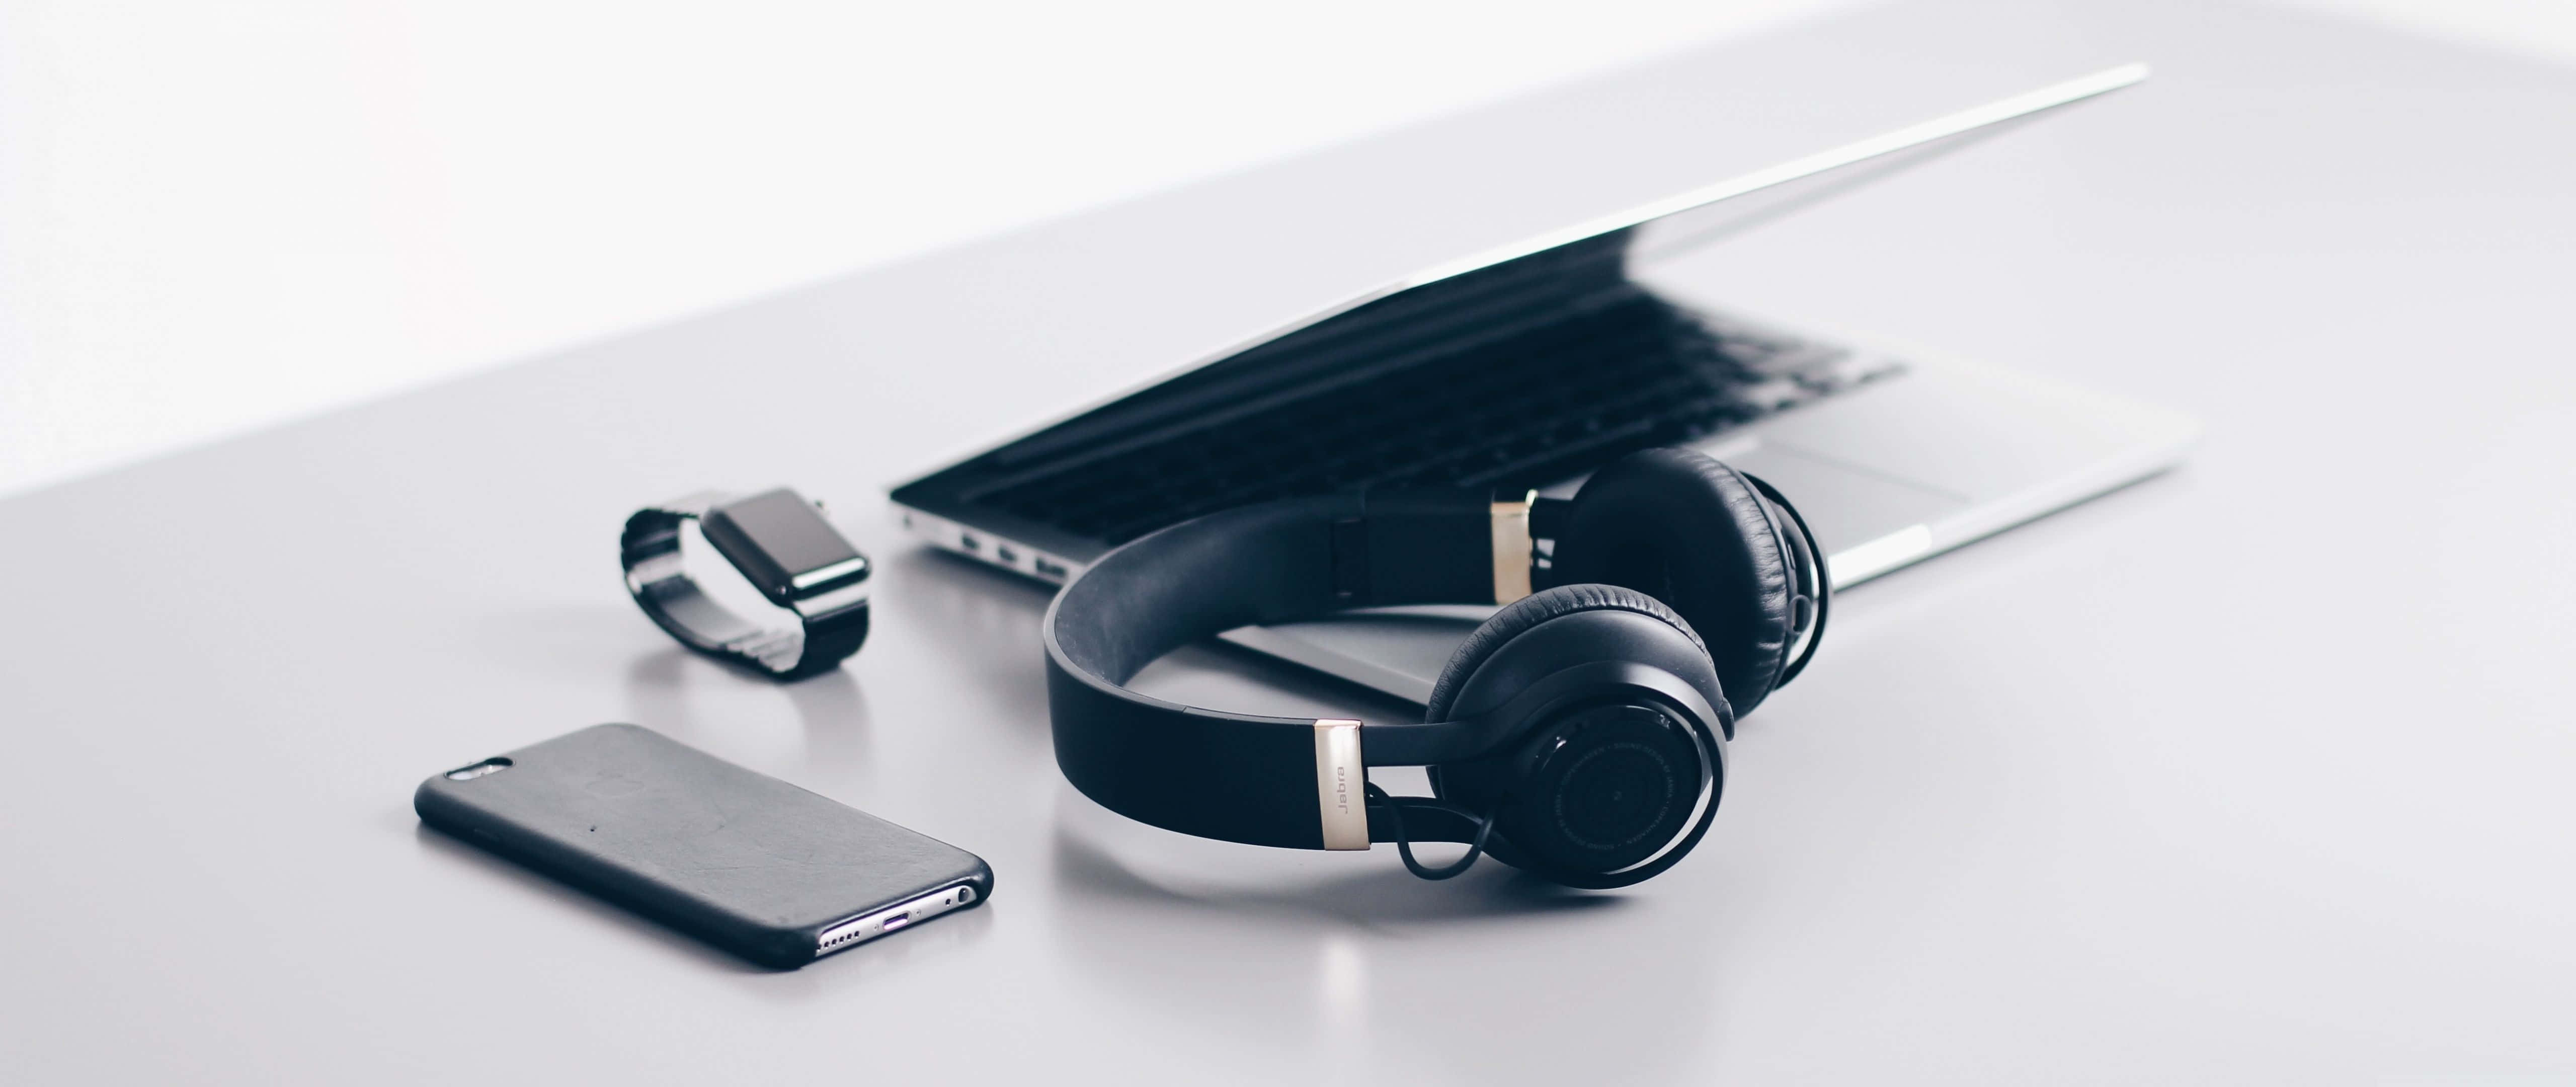 Enjoy Music and Technology With a Laptop and Headphones Wallpaper